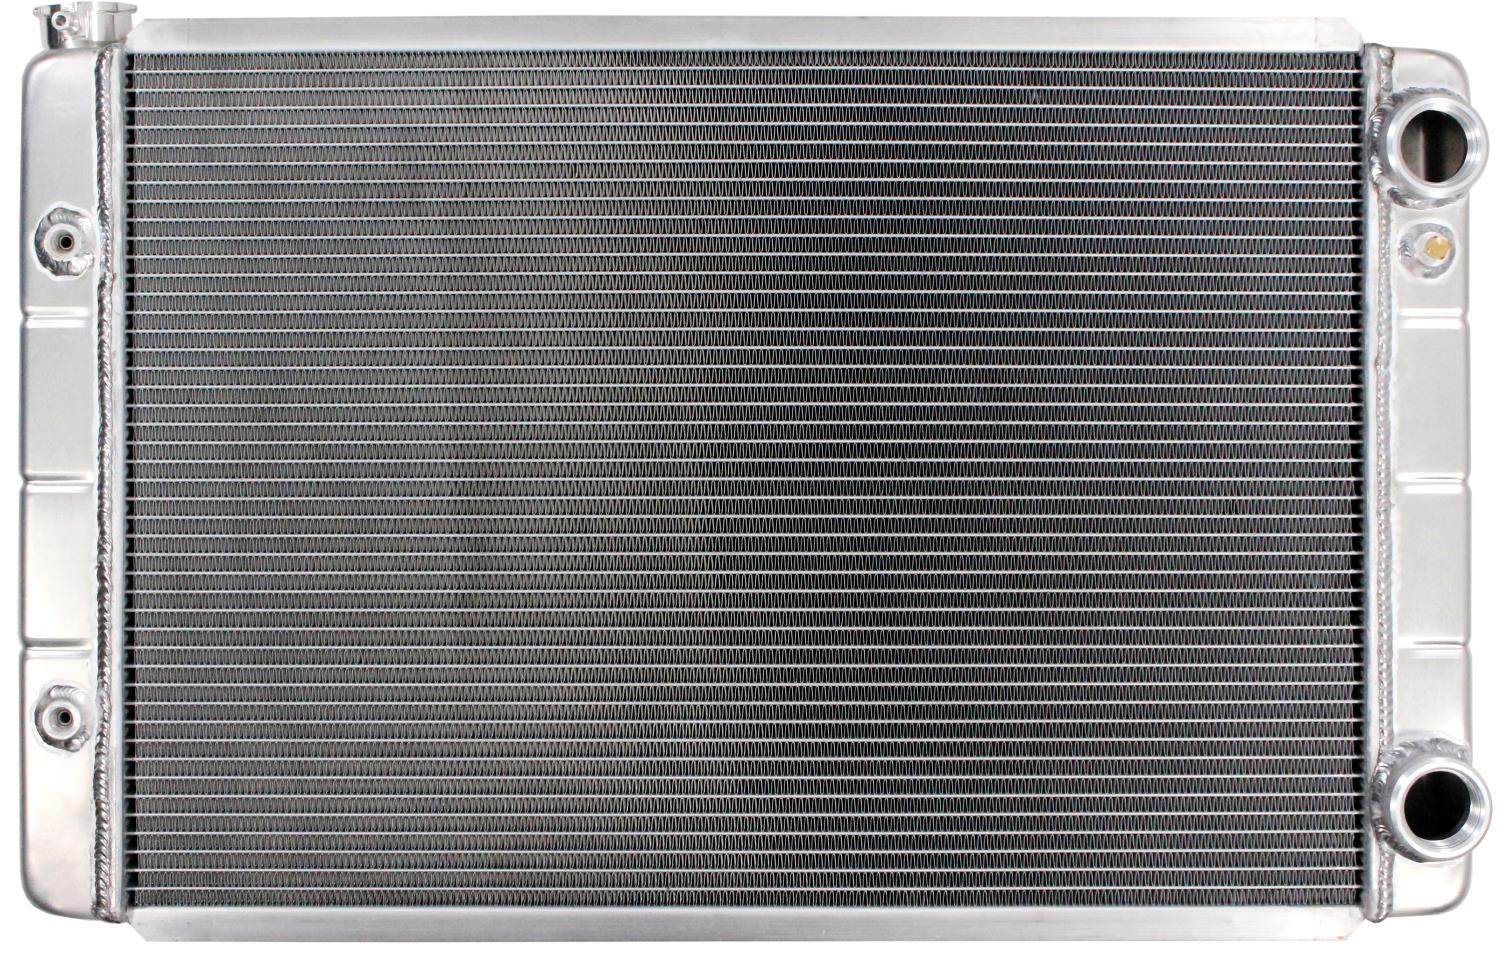 Chevy LS Configuration Double Pass Aluminum Radiator, 2 Row, 1 in. Core w/ ORB Ports & Transmission Cooler [Crossflow]